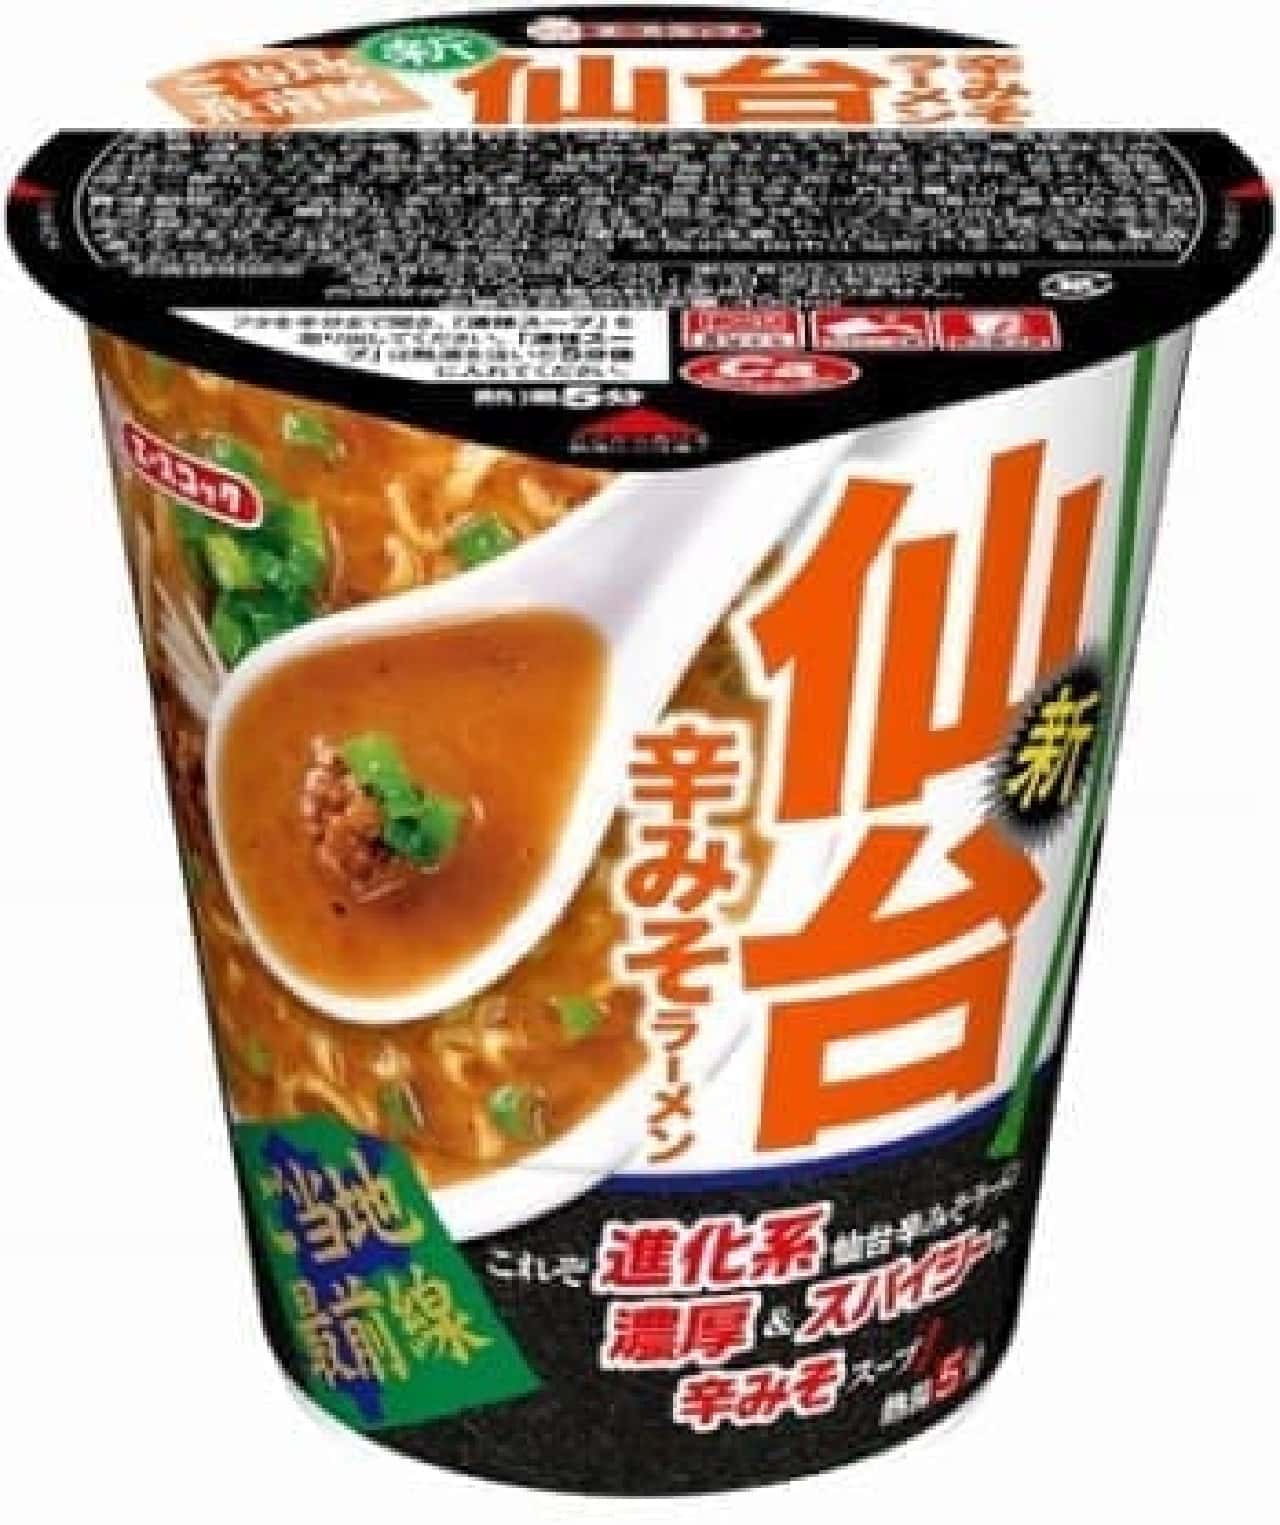 You want to eat "spicy miso" in winter